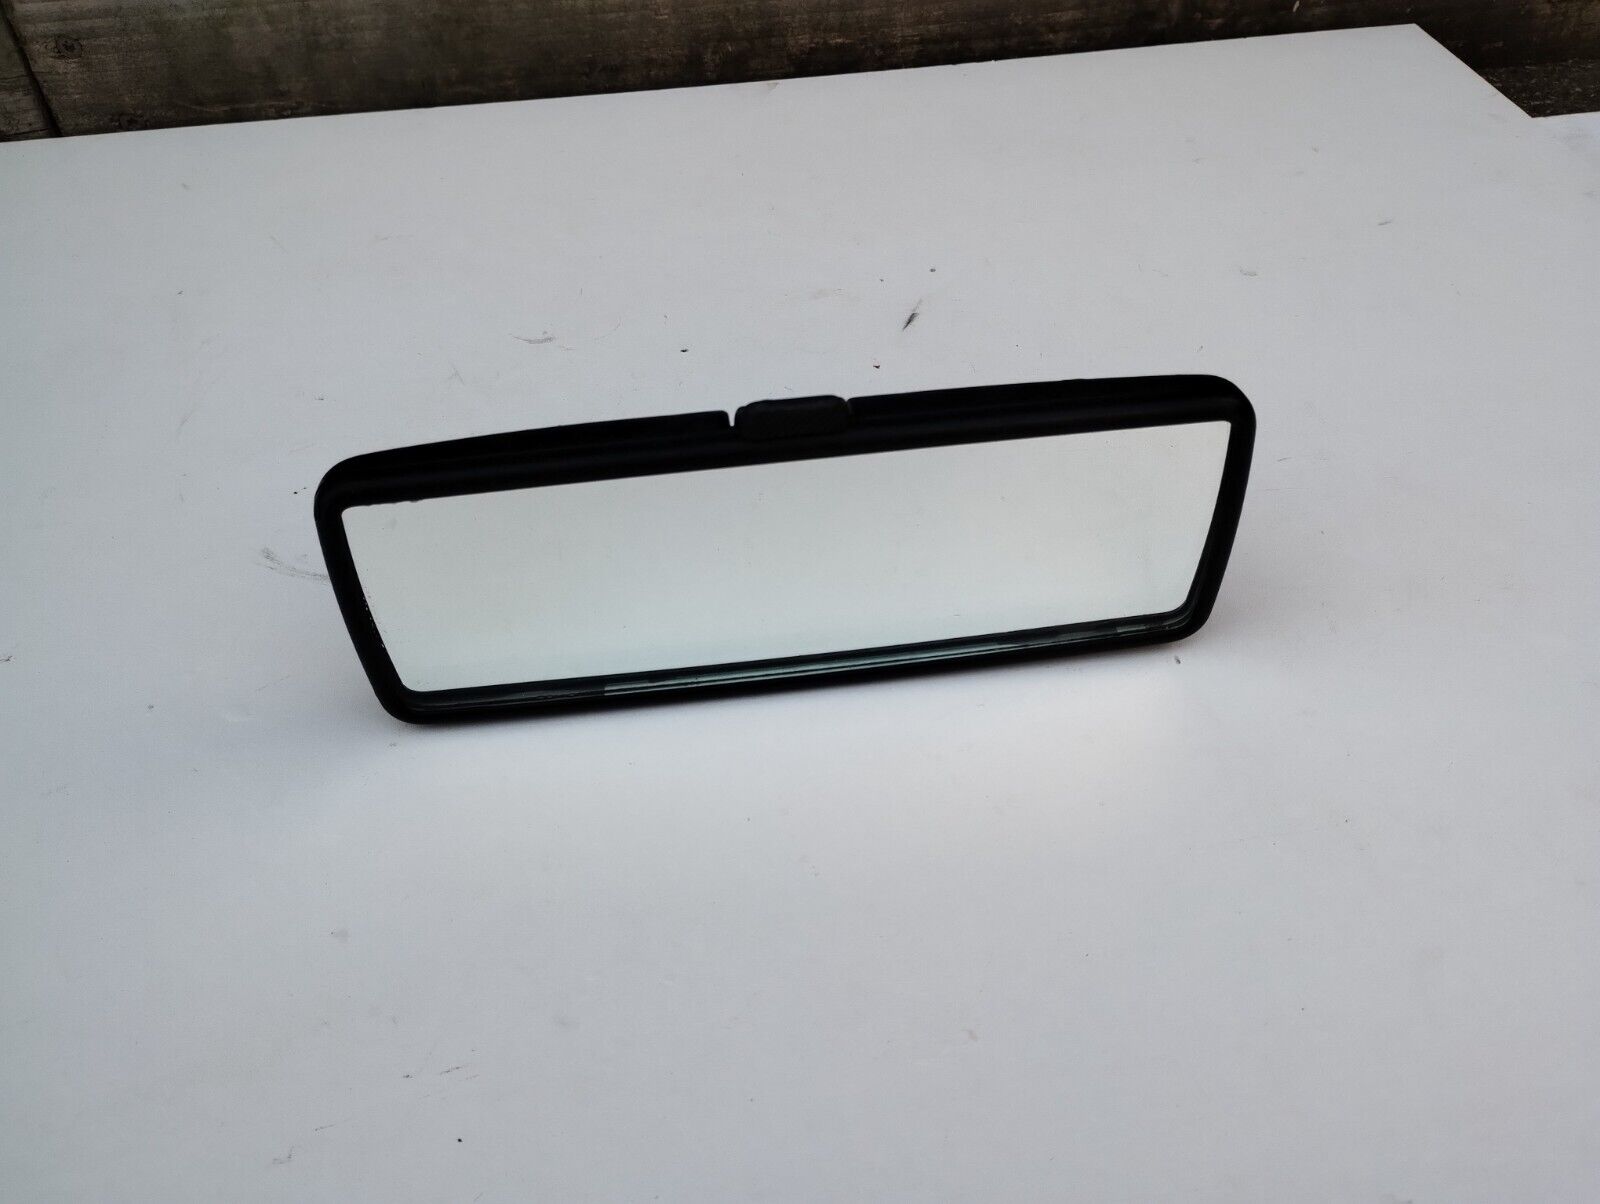 Vw t4 Transporter Caravelle rear view mirror